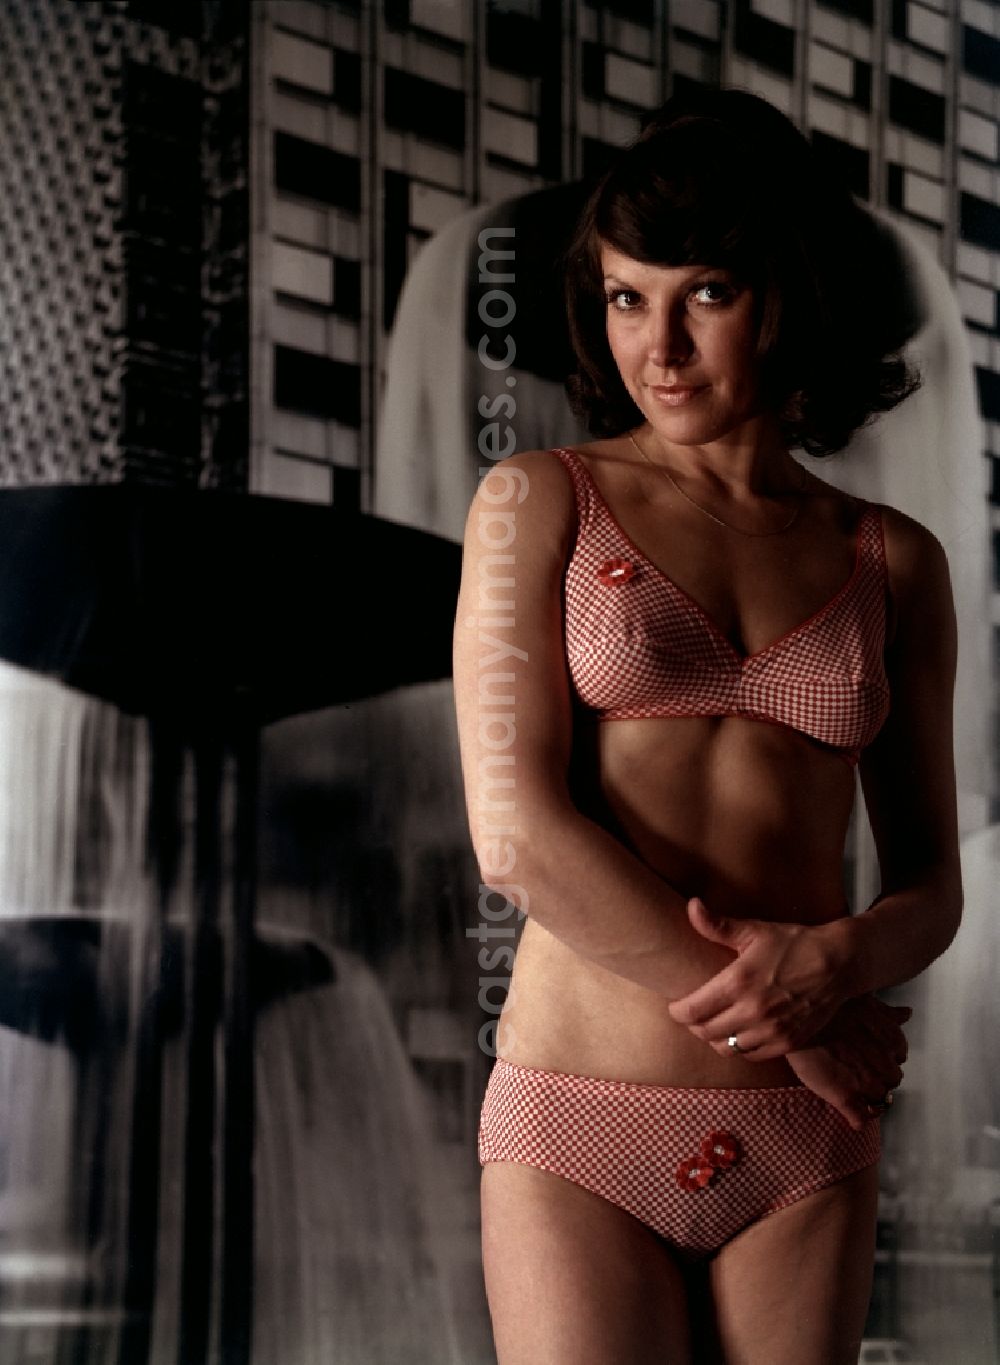 GDR photo archive: Pirna - Young models woman presents current women's  fashion collection with women's underwear in